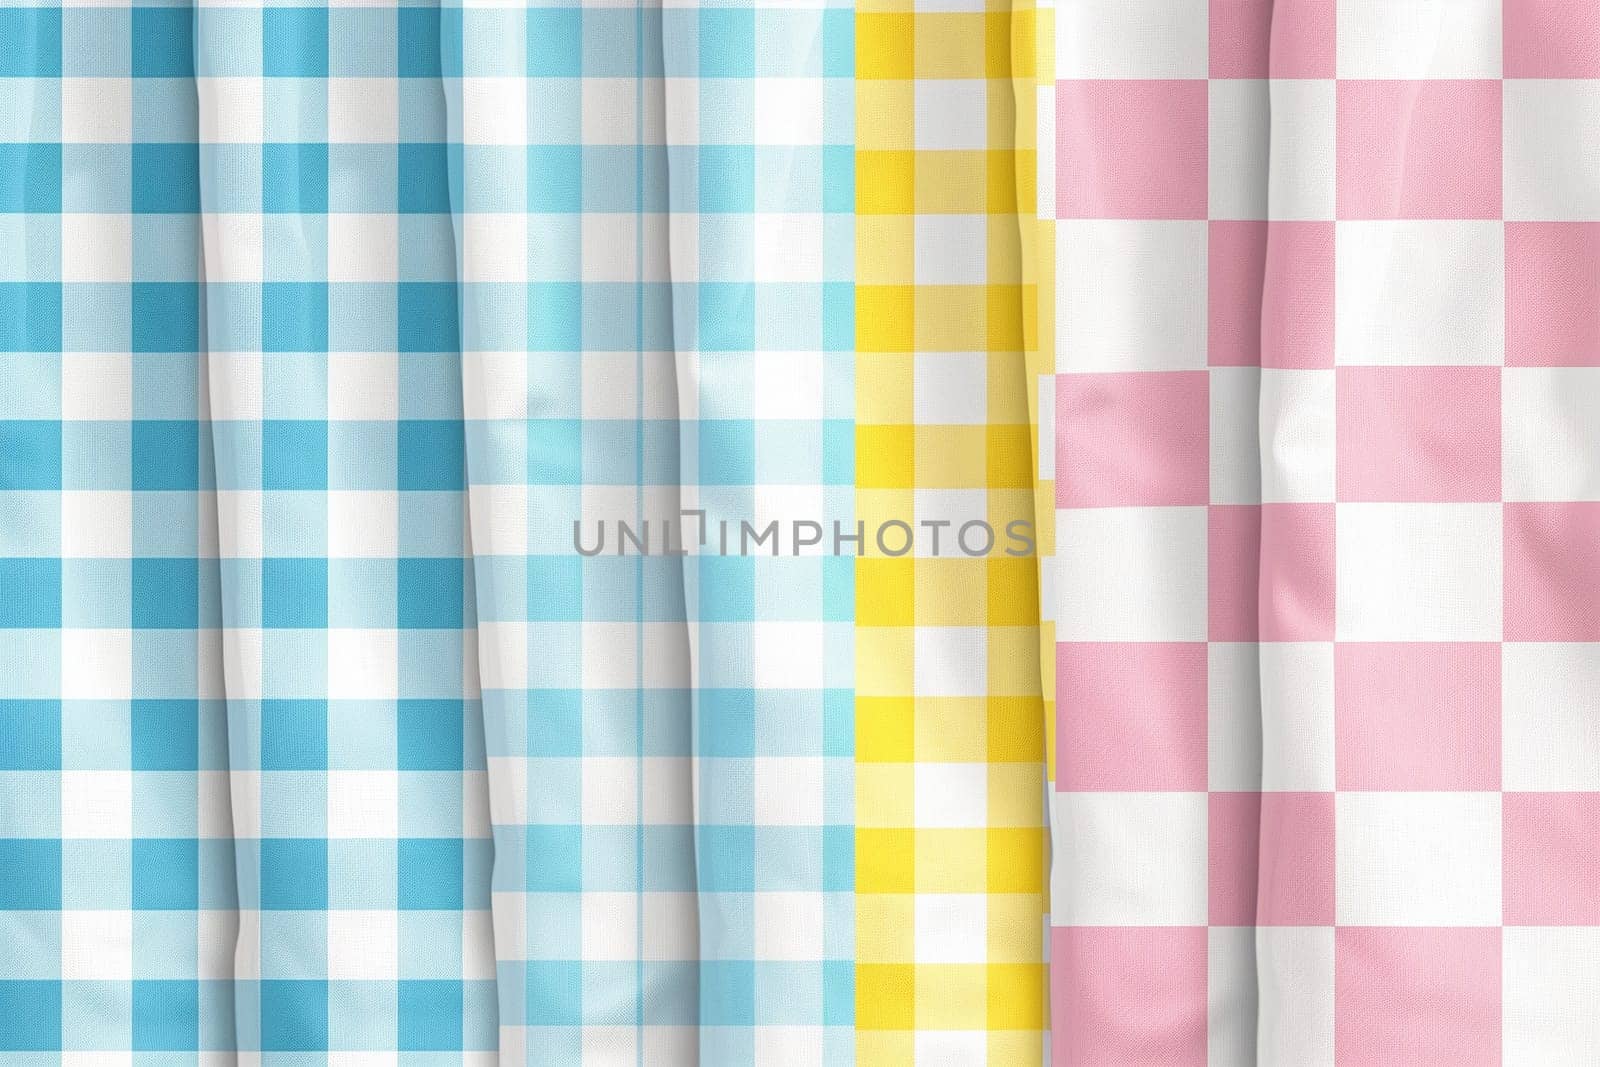 Checkered pattern featuring a variety of colors and sizes arranged in a distinct design.